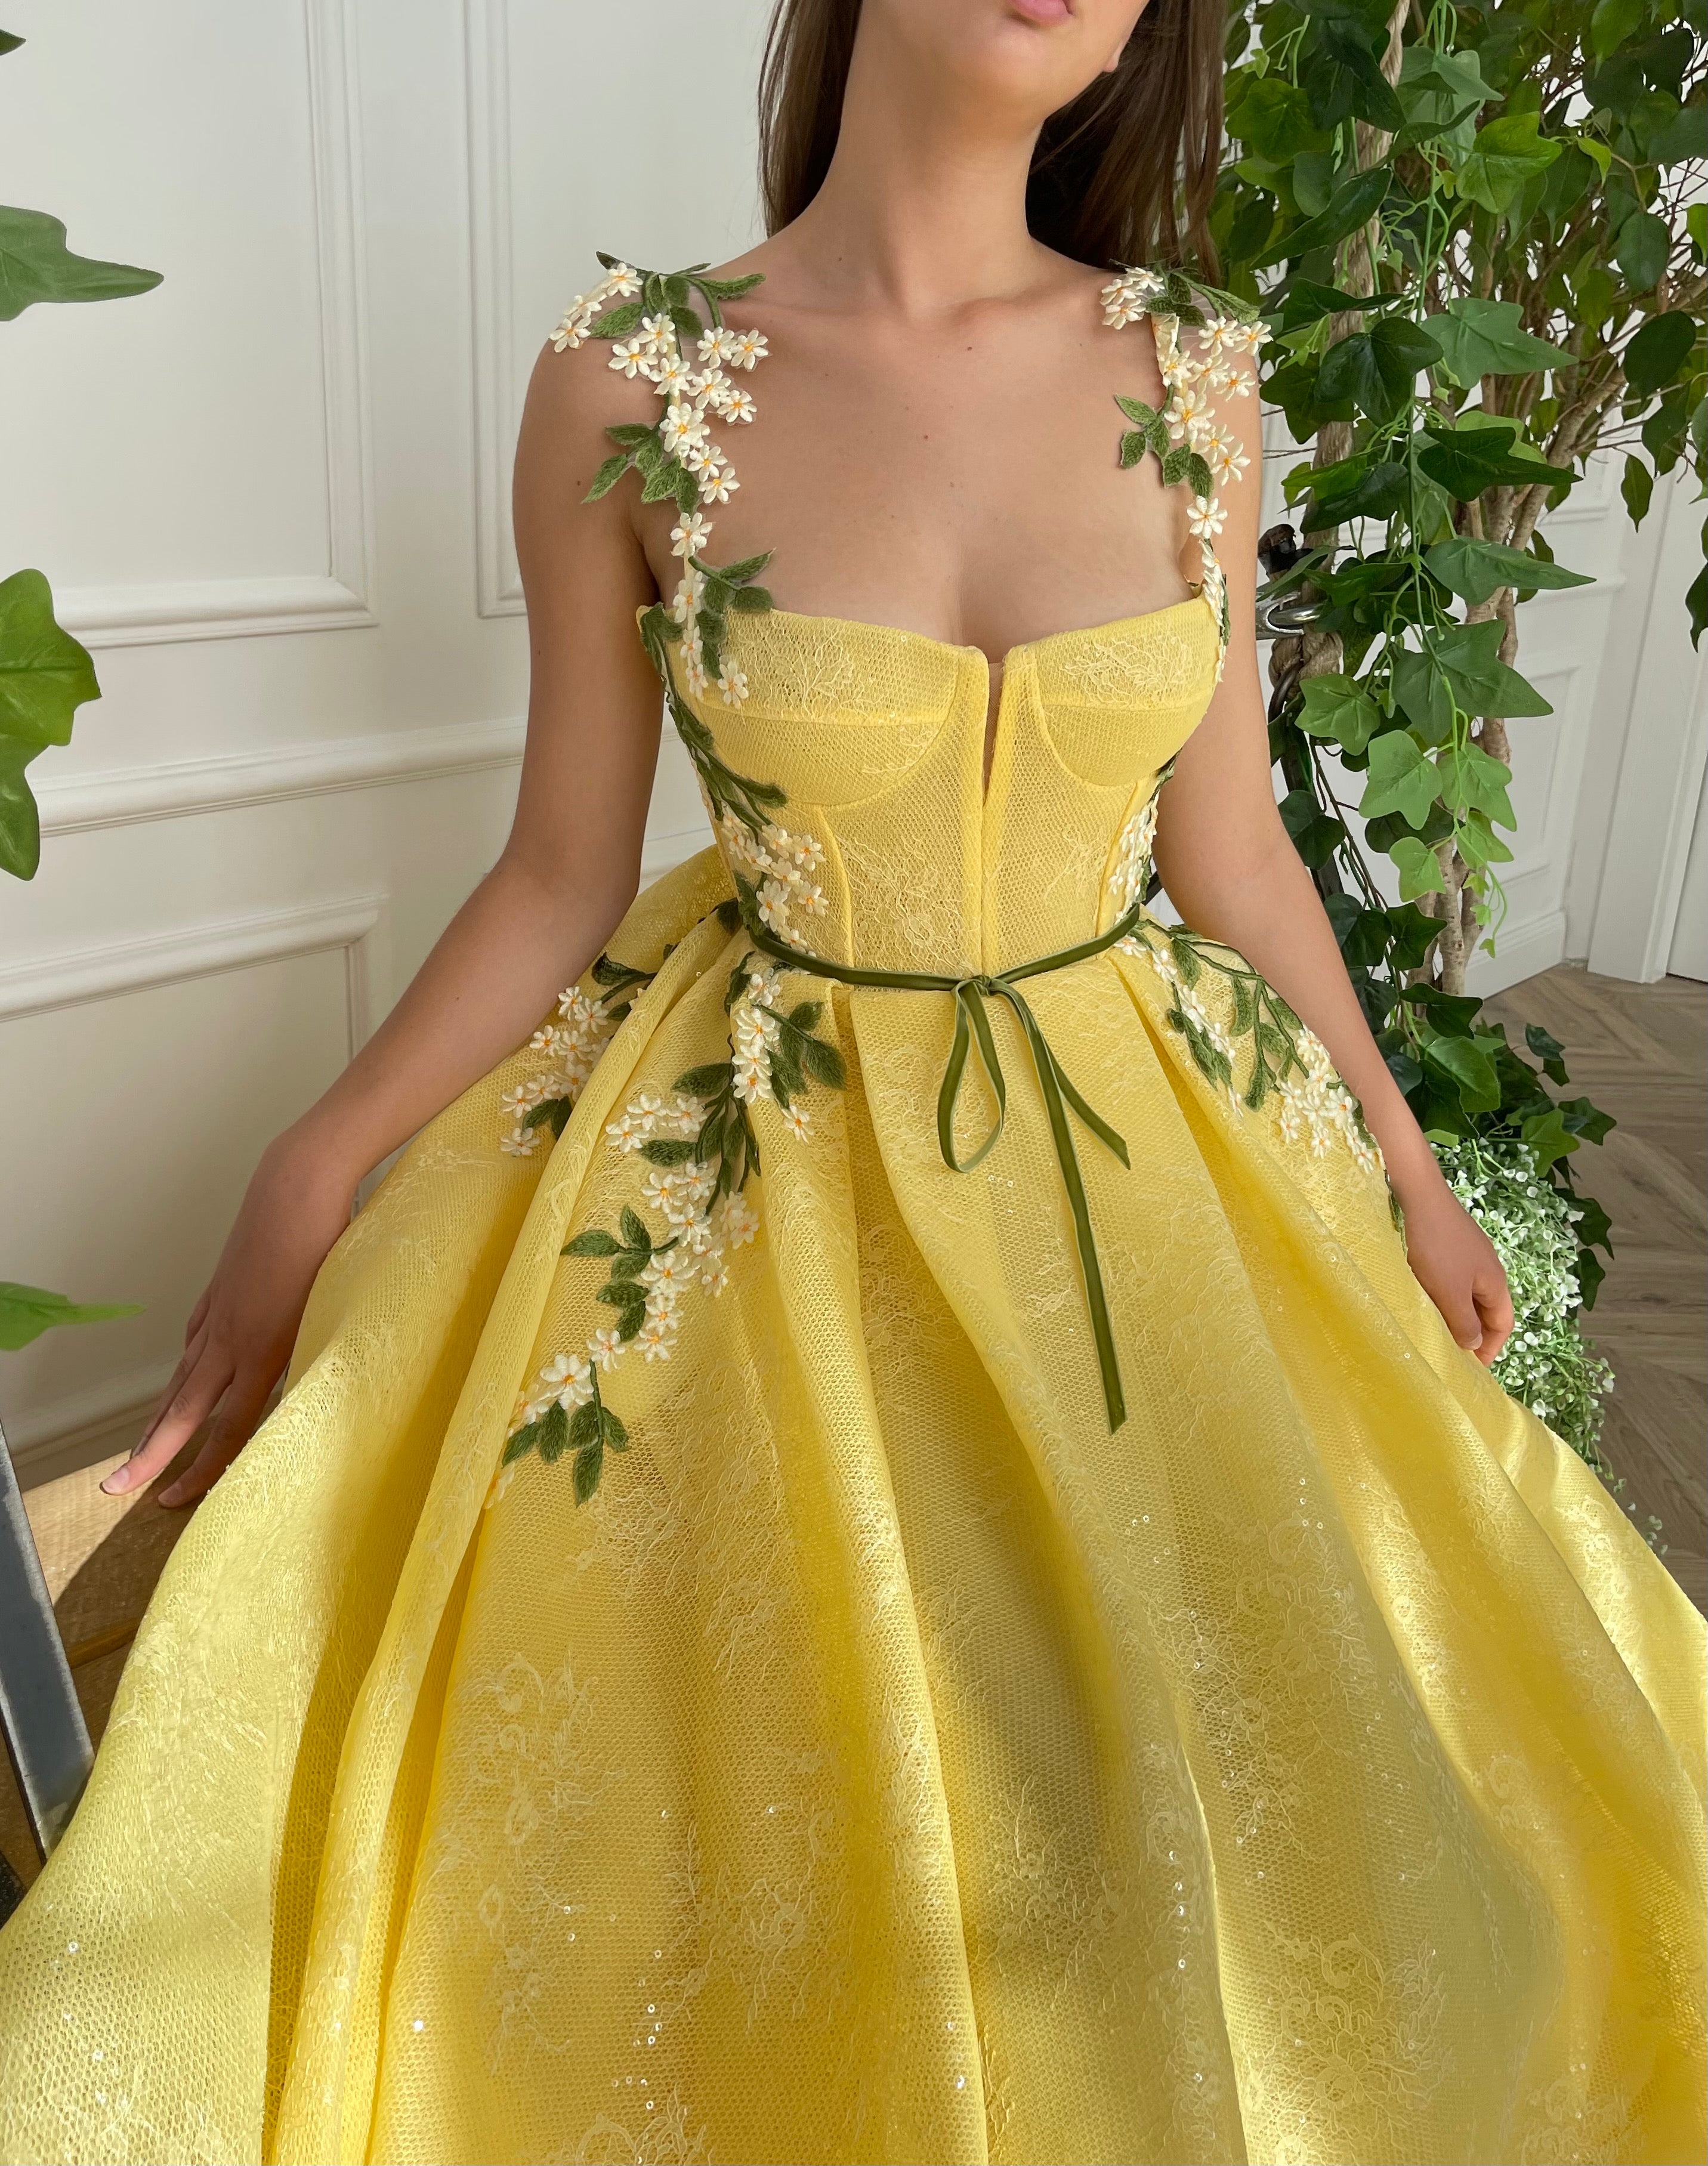 Yellow A-Line dress with embroidery and spaghetti straps